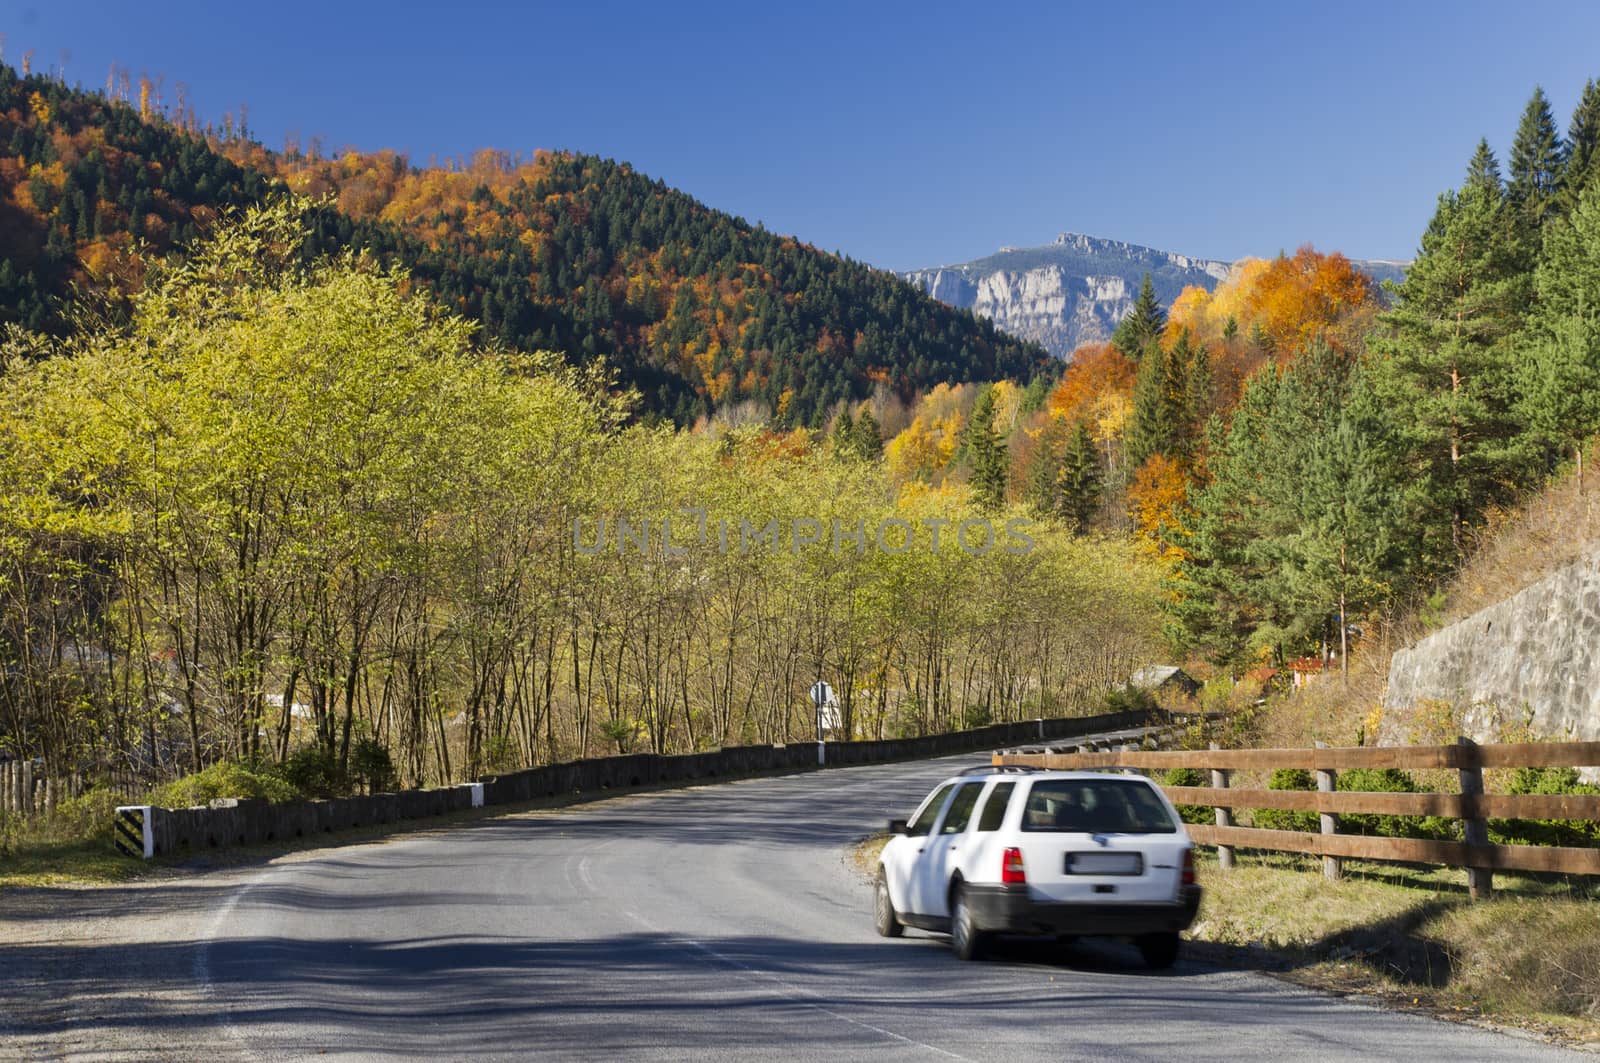 moving car on road in autumn mountain landscape